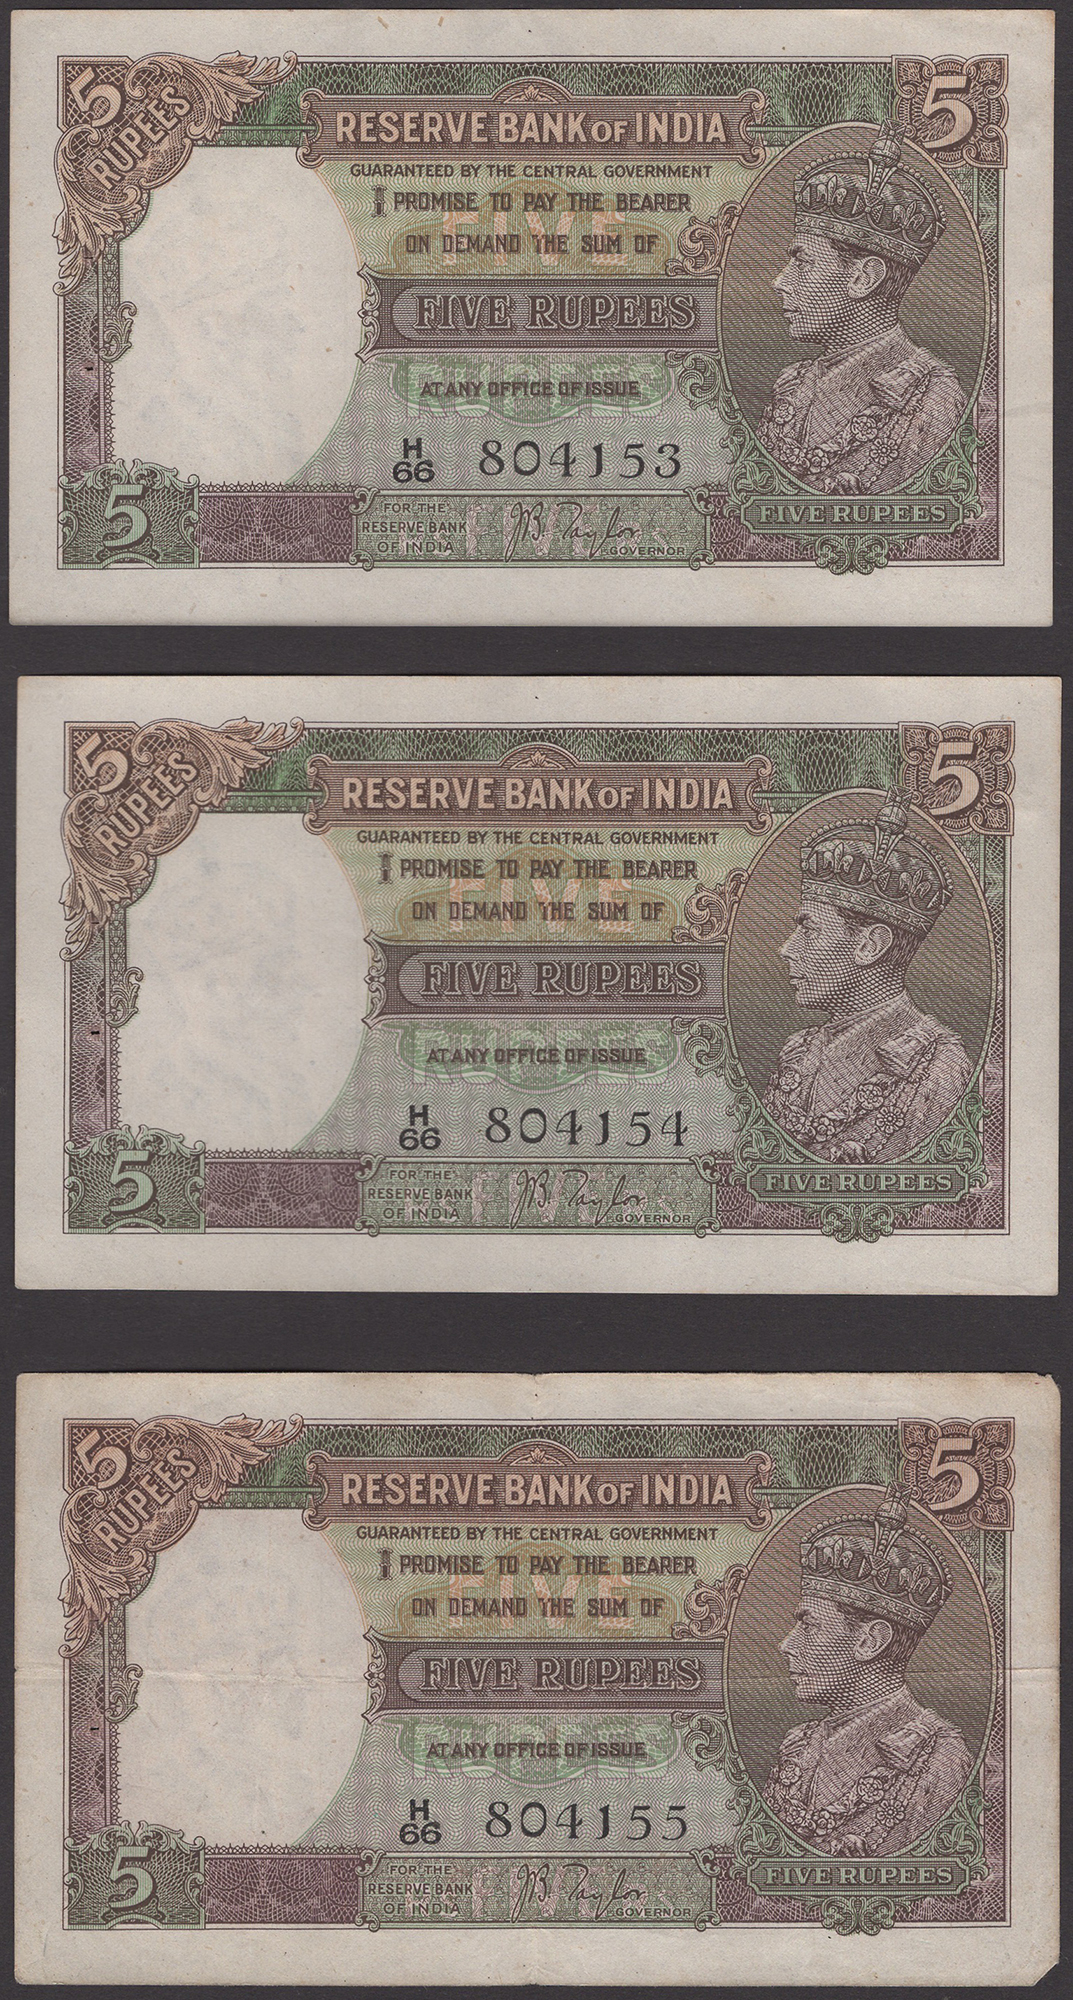 Reserve Bank of India, 5 Rupees (7), ND (1937), consecutive serial numbers H/66 804150-56,... - Bild 3 aus 6